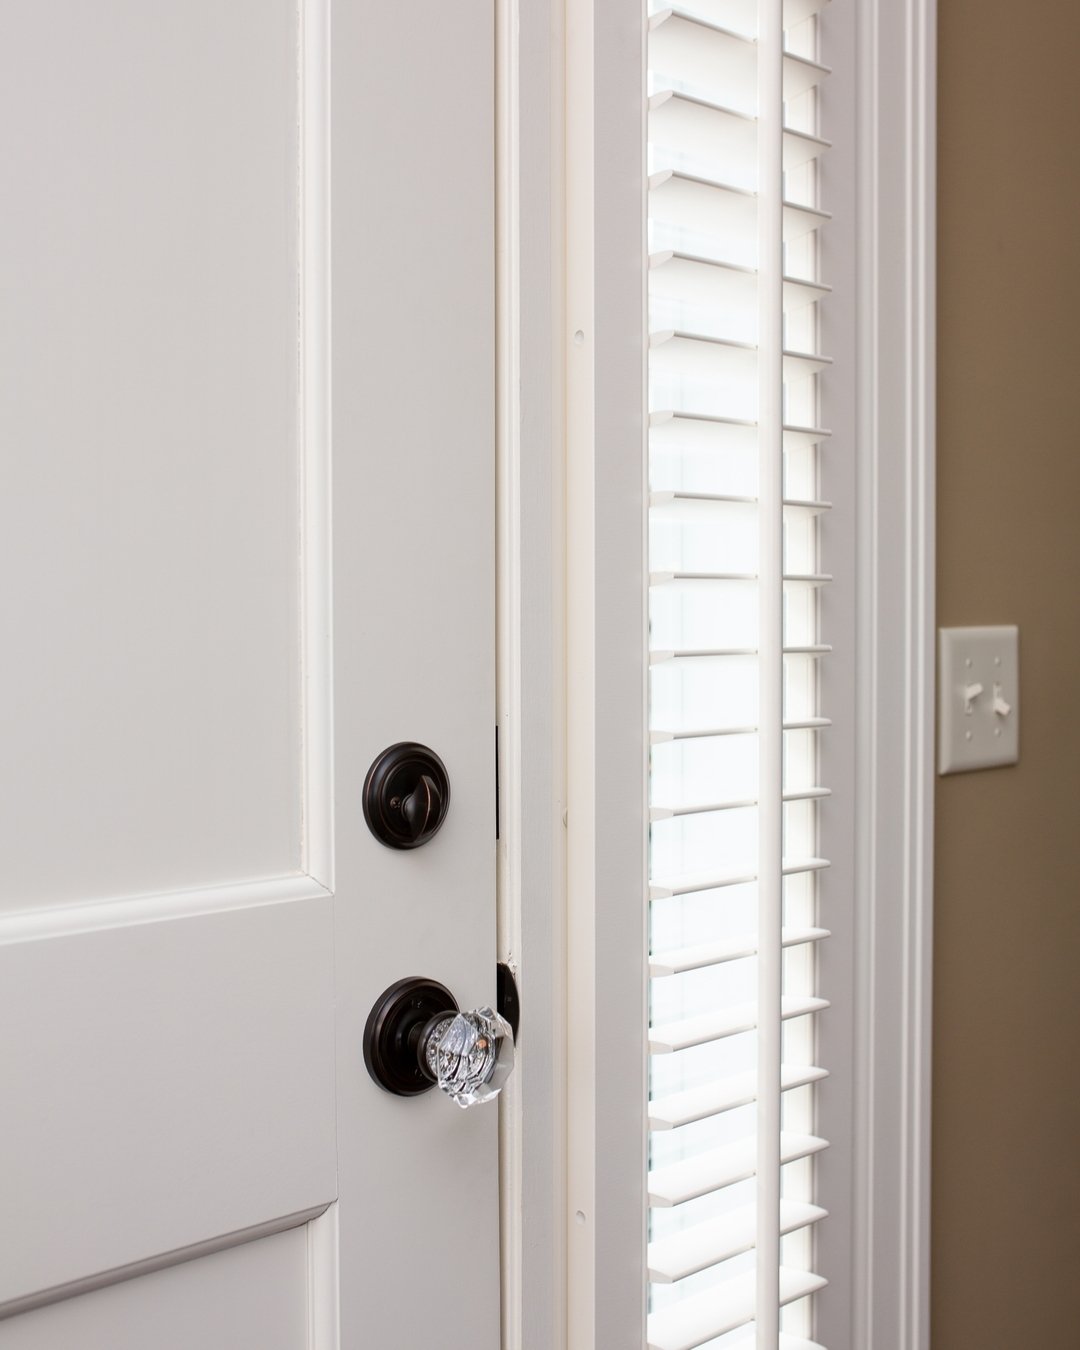 Shutters are a smart and stylish way to bring privacy and light control to a space &mdash; from sidelights to bathroom windows and everywhere in between. Union Place takes care of everything from measuring to helping with selection and doing the fina